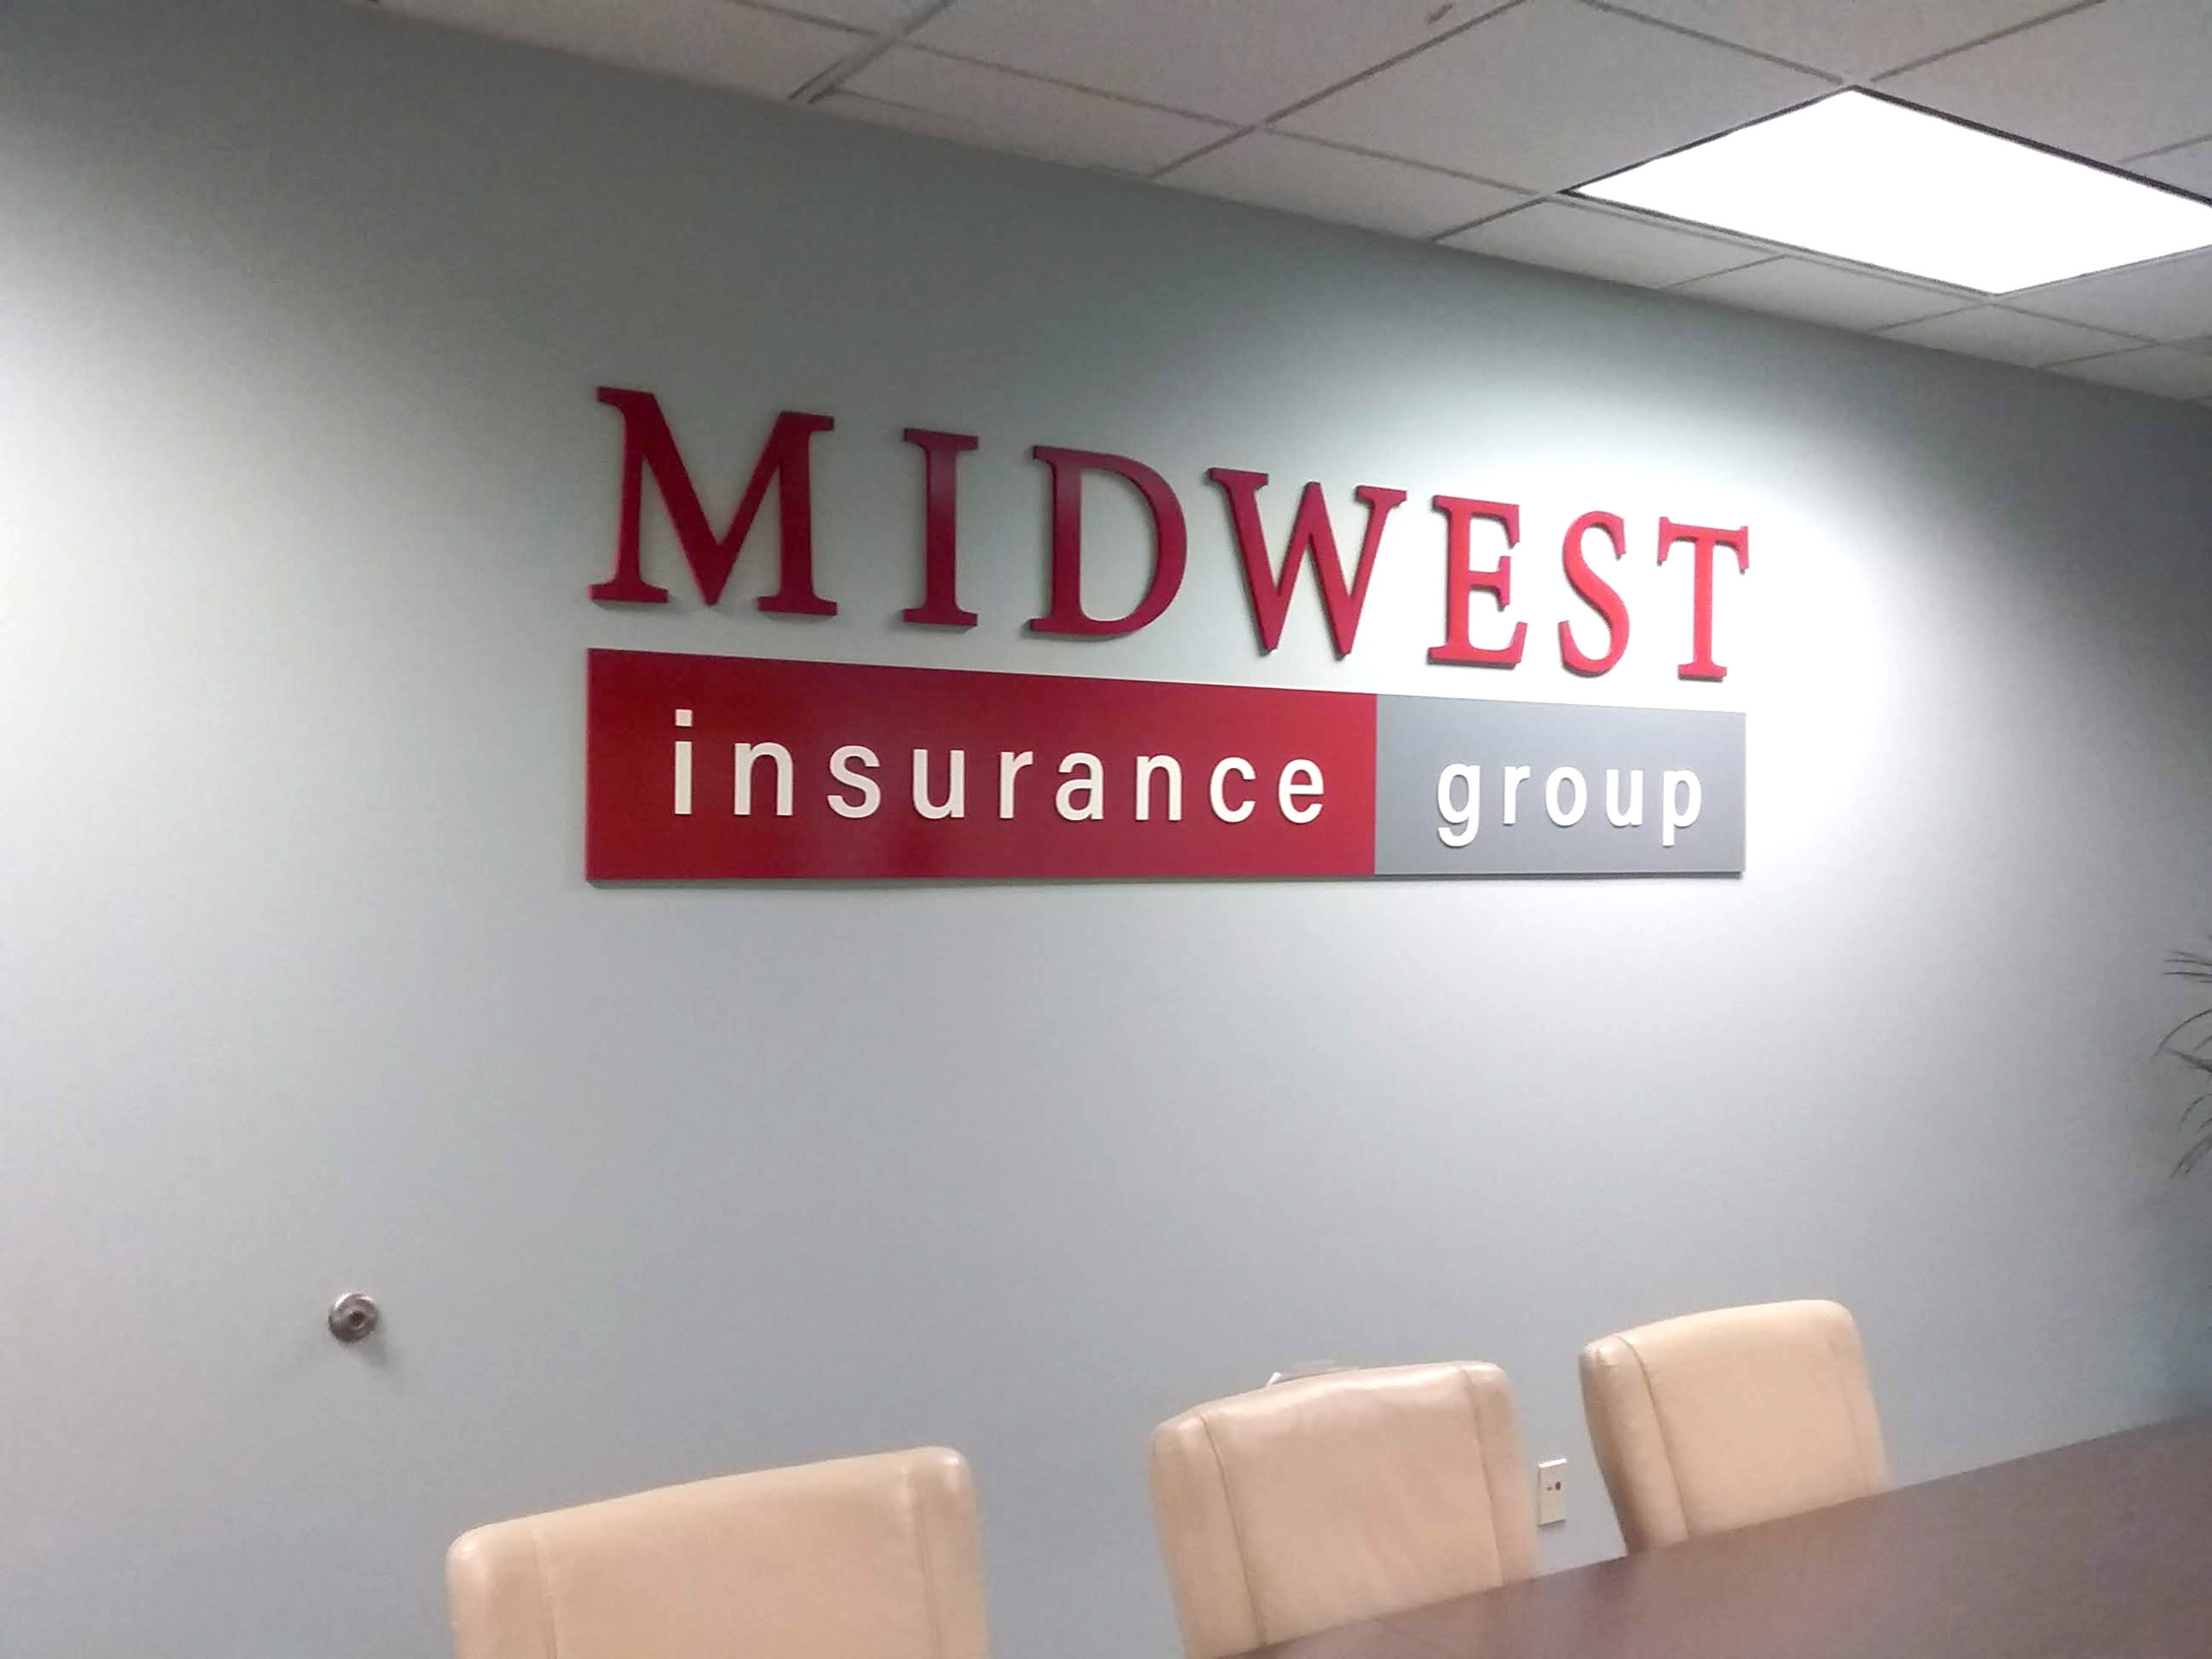 midwest insurance group wall sign